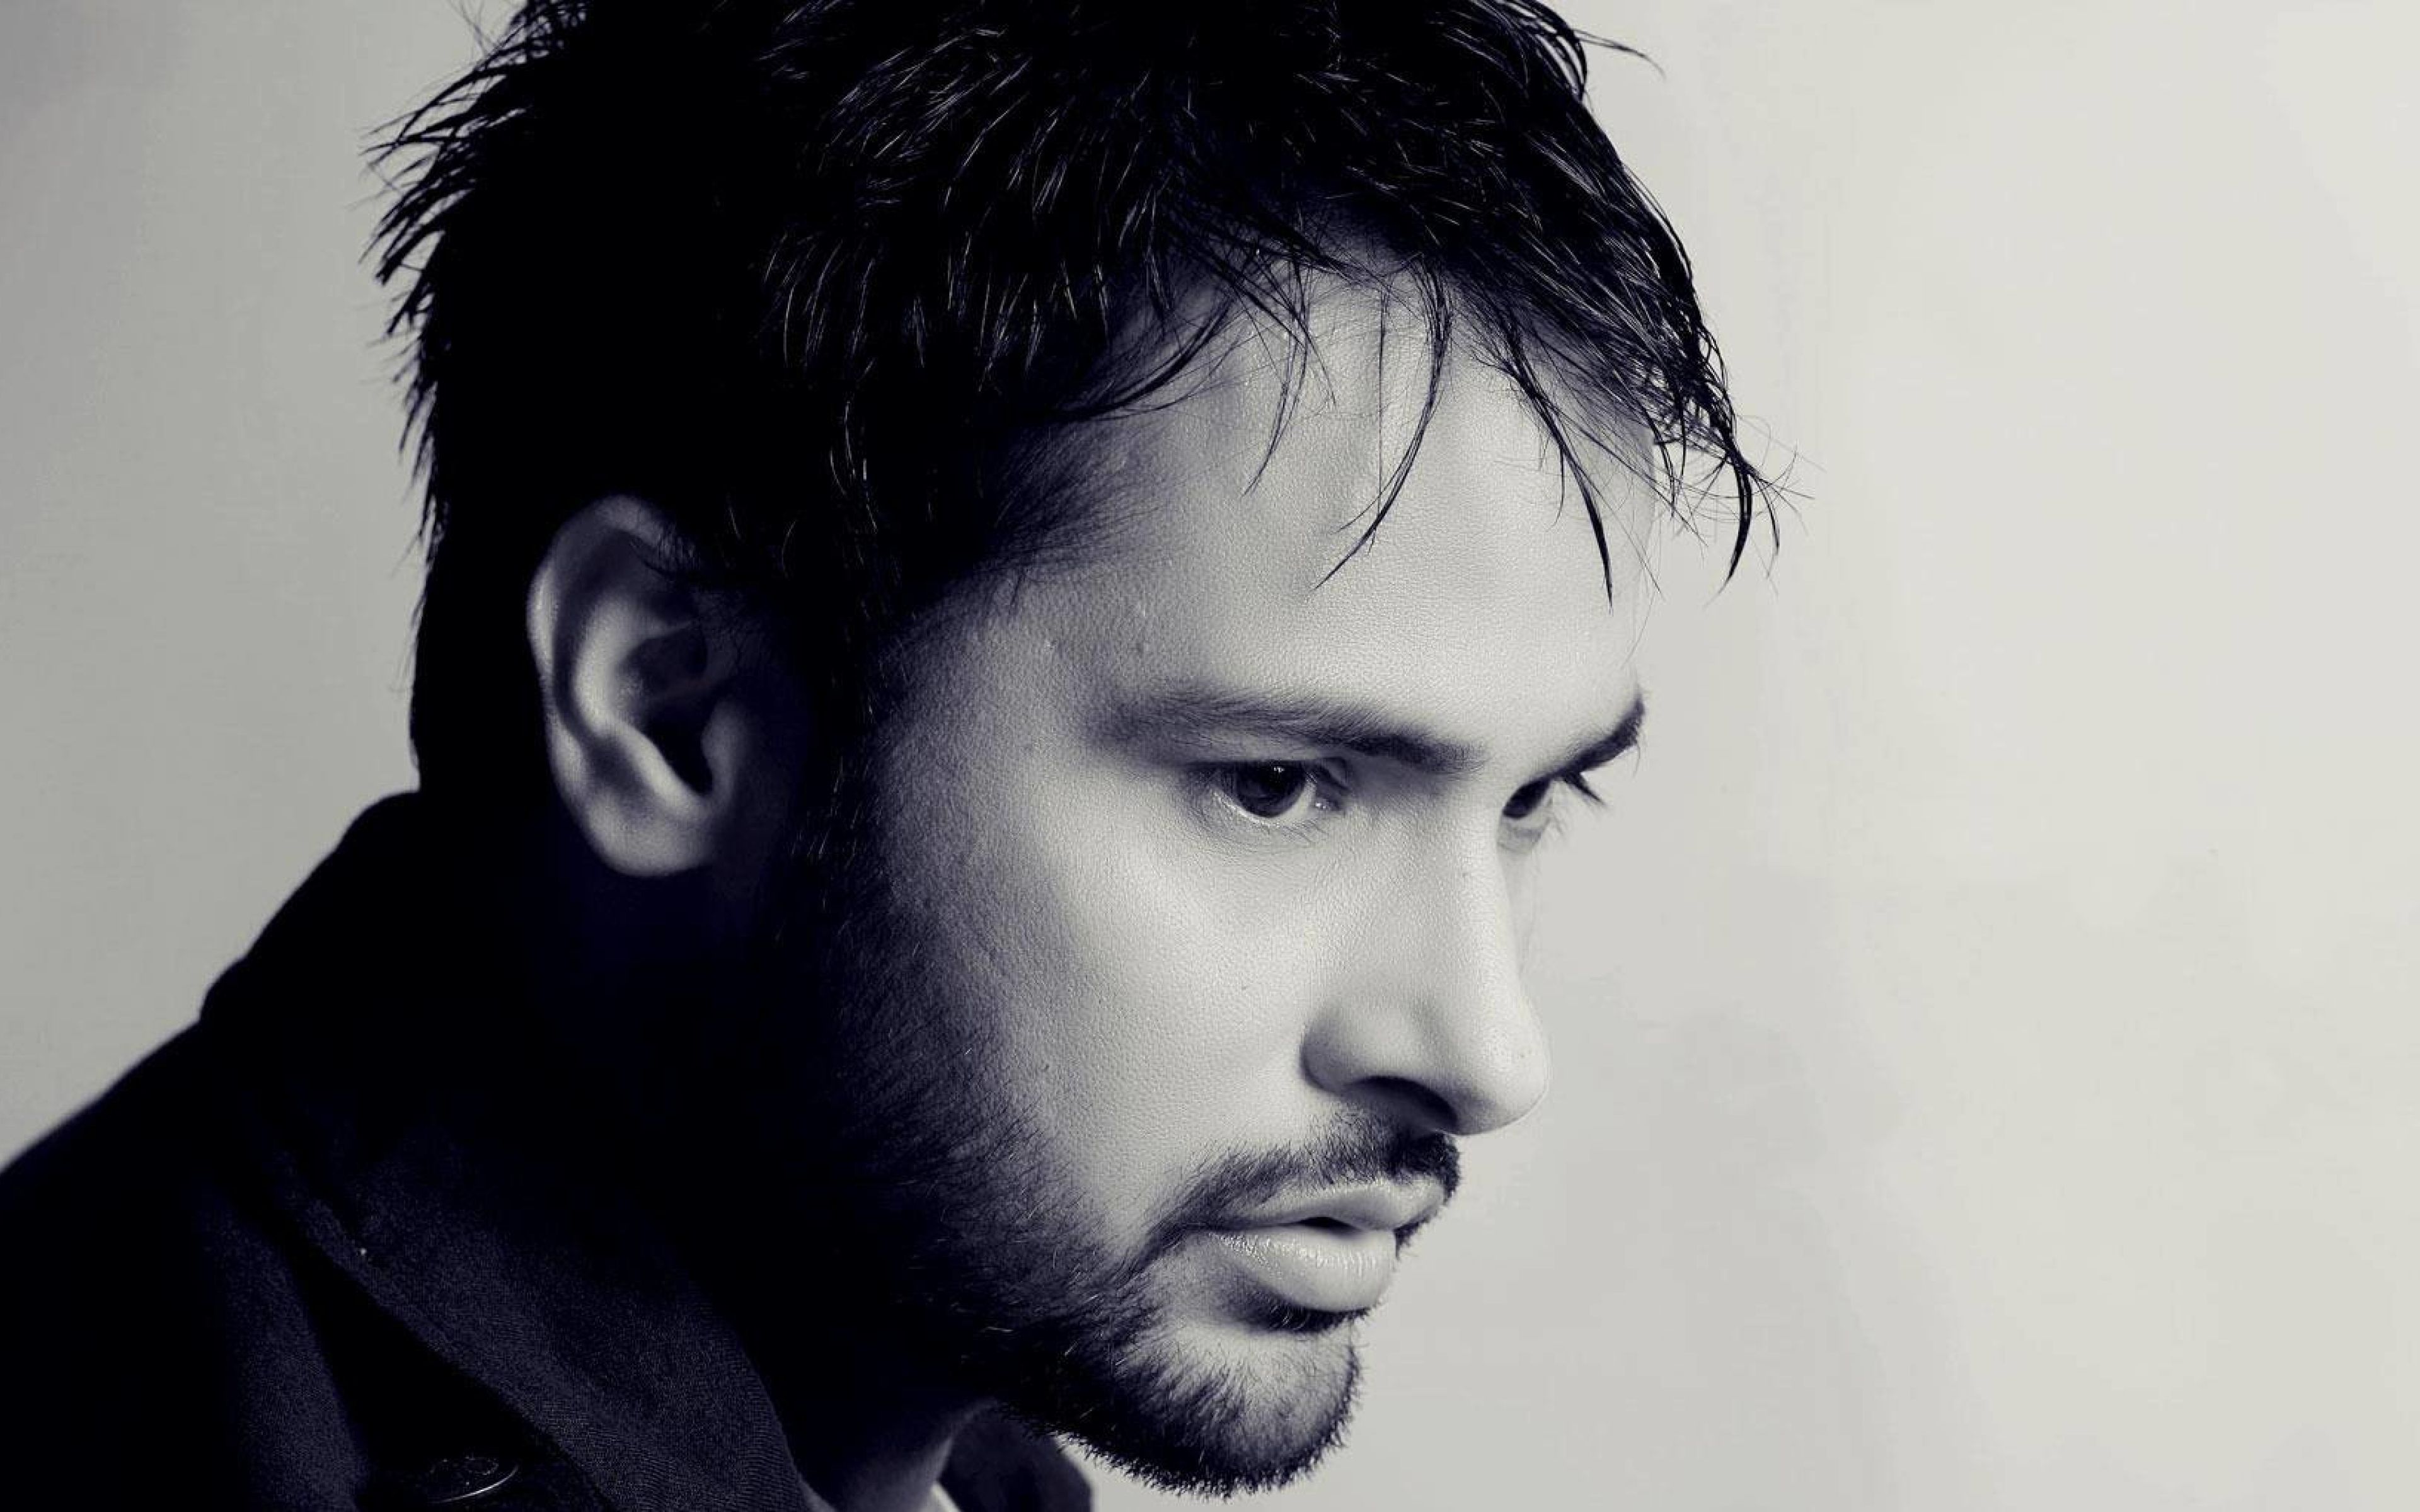 Amrinder Gill Black And White Wallpaper UHD 4K 3840x2400 Resolution Wallpaper, HD Celebrities 4K Wallpaper, Image, Photo and Background